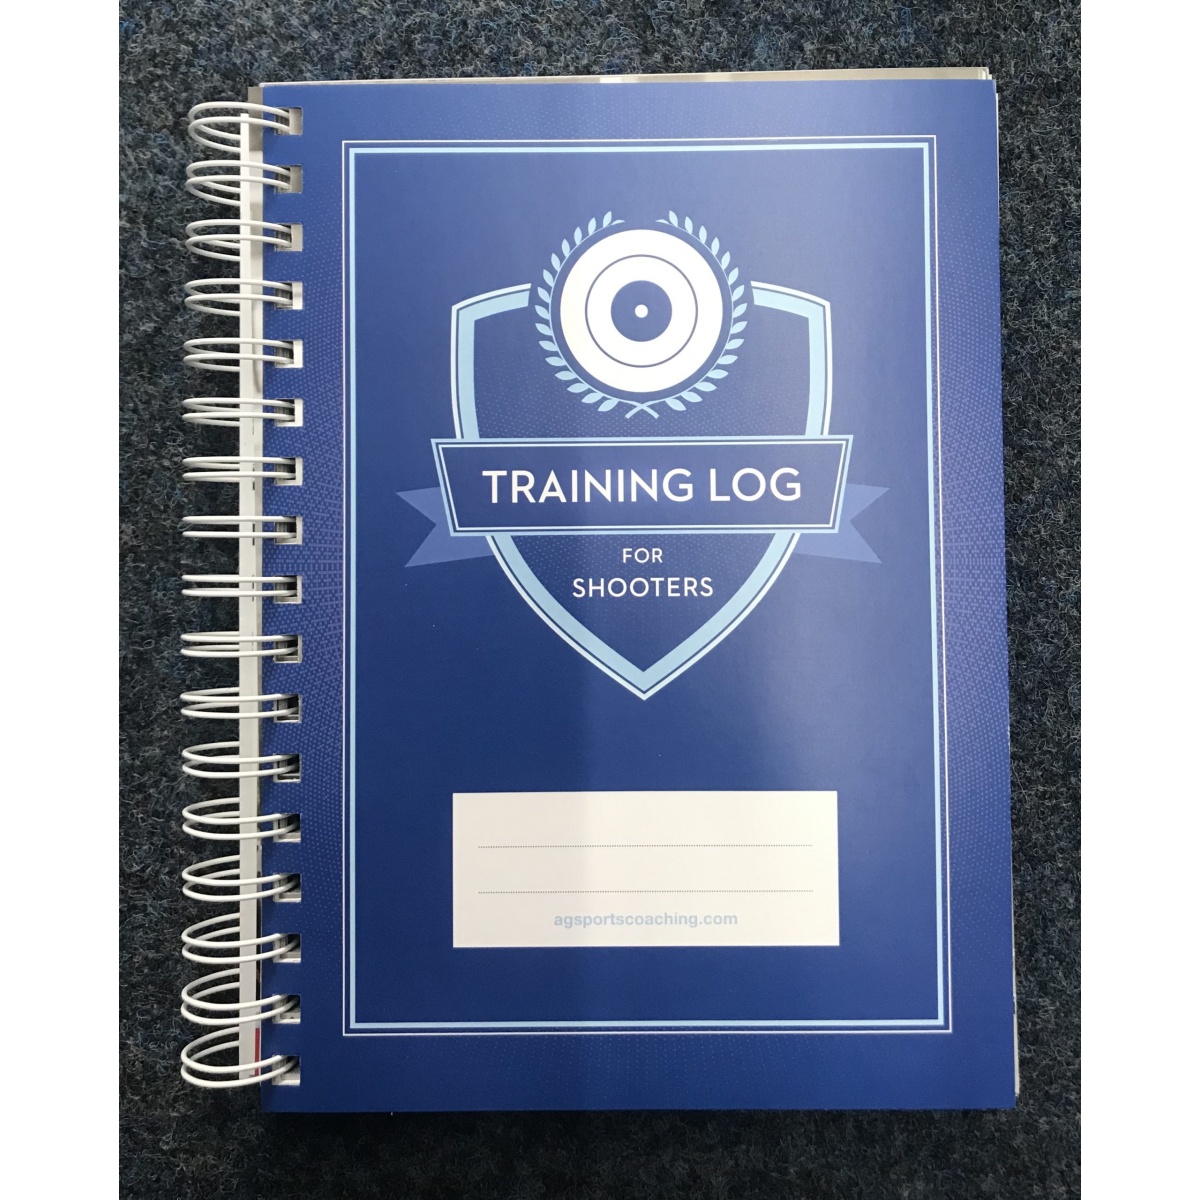 Training Log for shooters